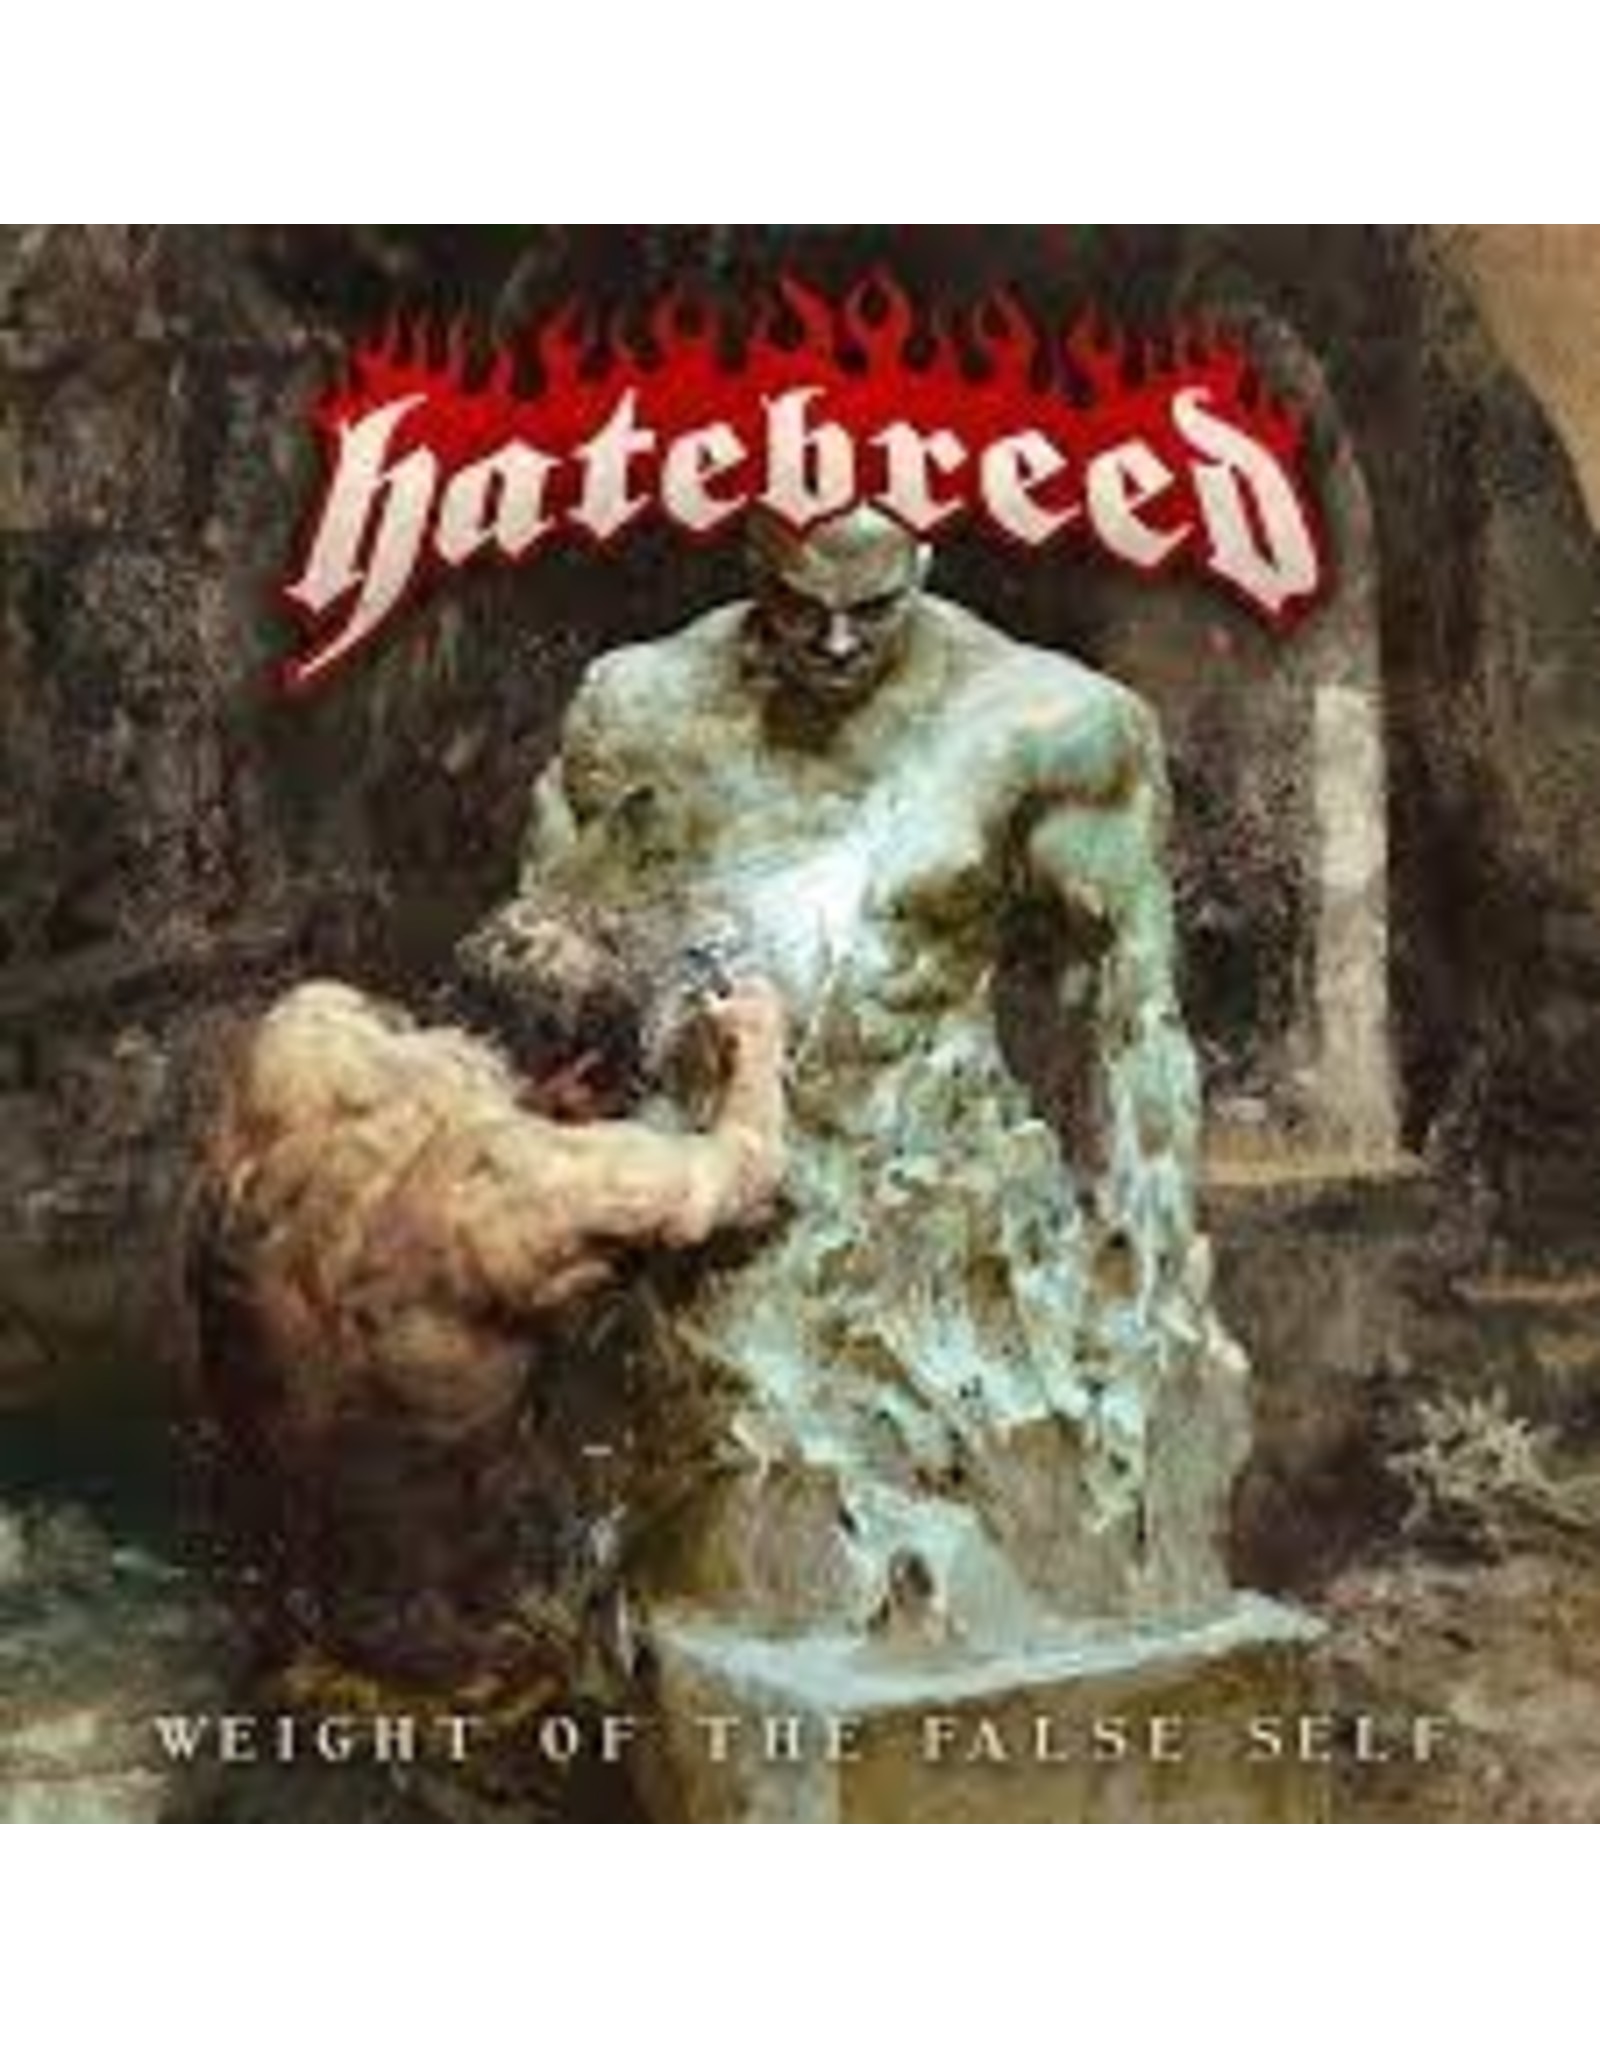 Hatebreed - Weight Of the False Self LP